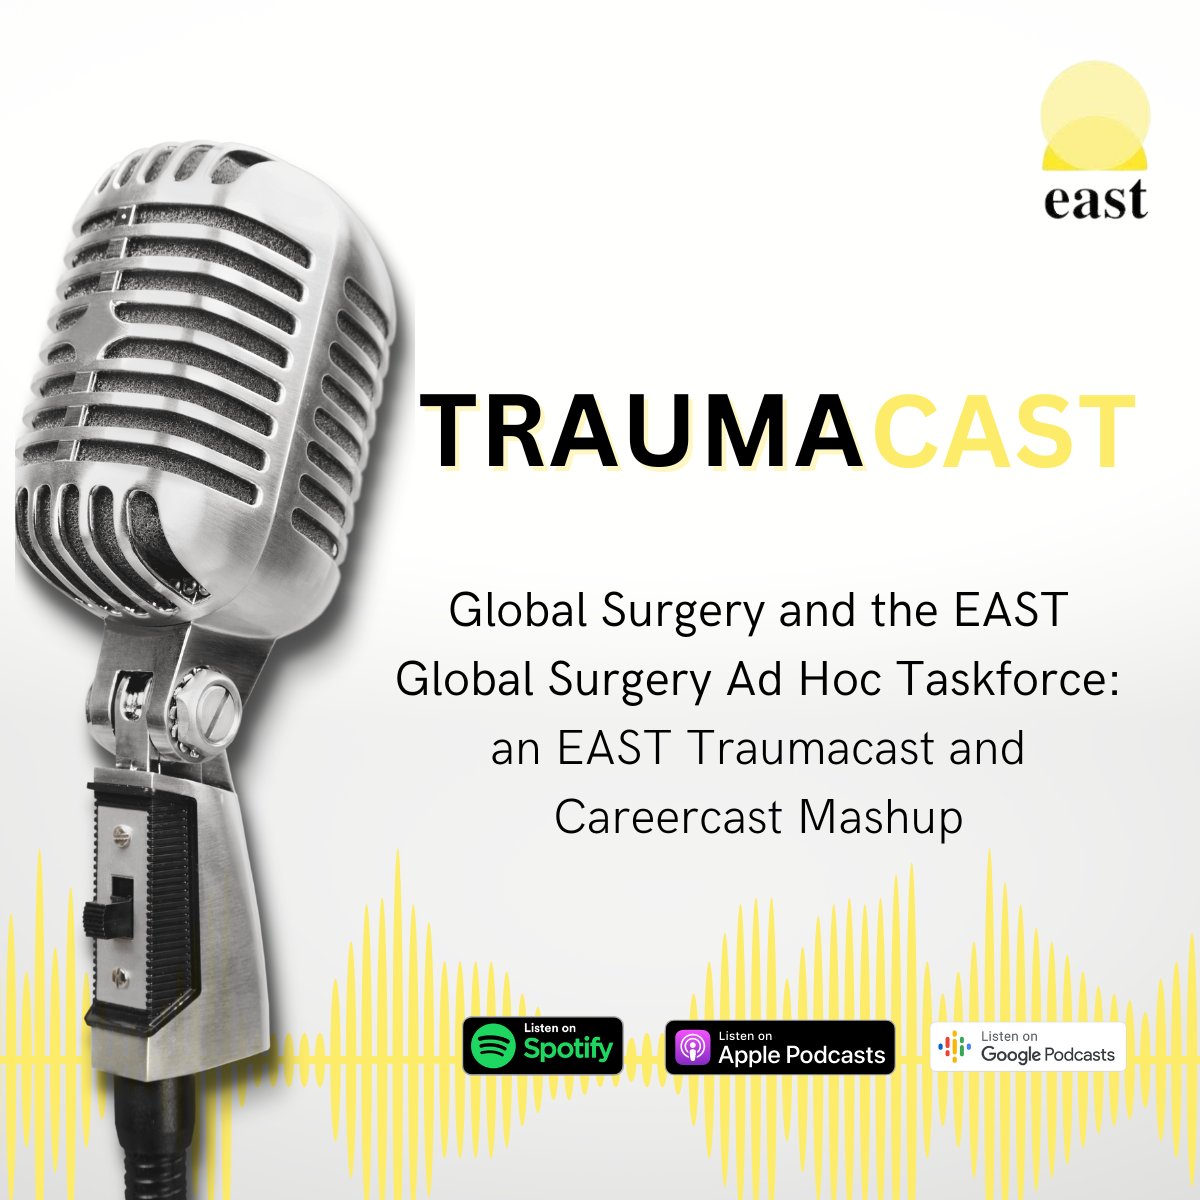 Join your EAST Traumacast & Careercast hosts @ldel302 @ladha_prerna & @HassanMashbari discuss Global Surgery w/ @ChrisDodgion @mikemmallahmd & Katie Iverson. What is it about, what resources are out there to get support & get involved? @MUSCGlobalSurg bit.ly/47ShKTO